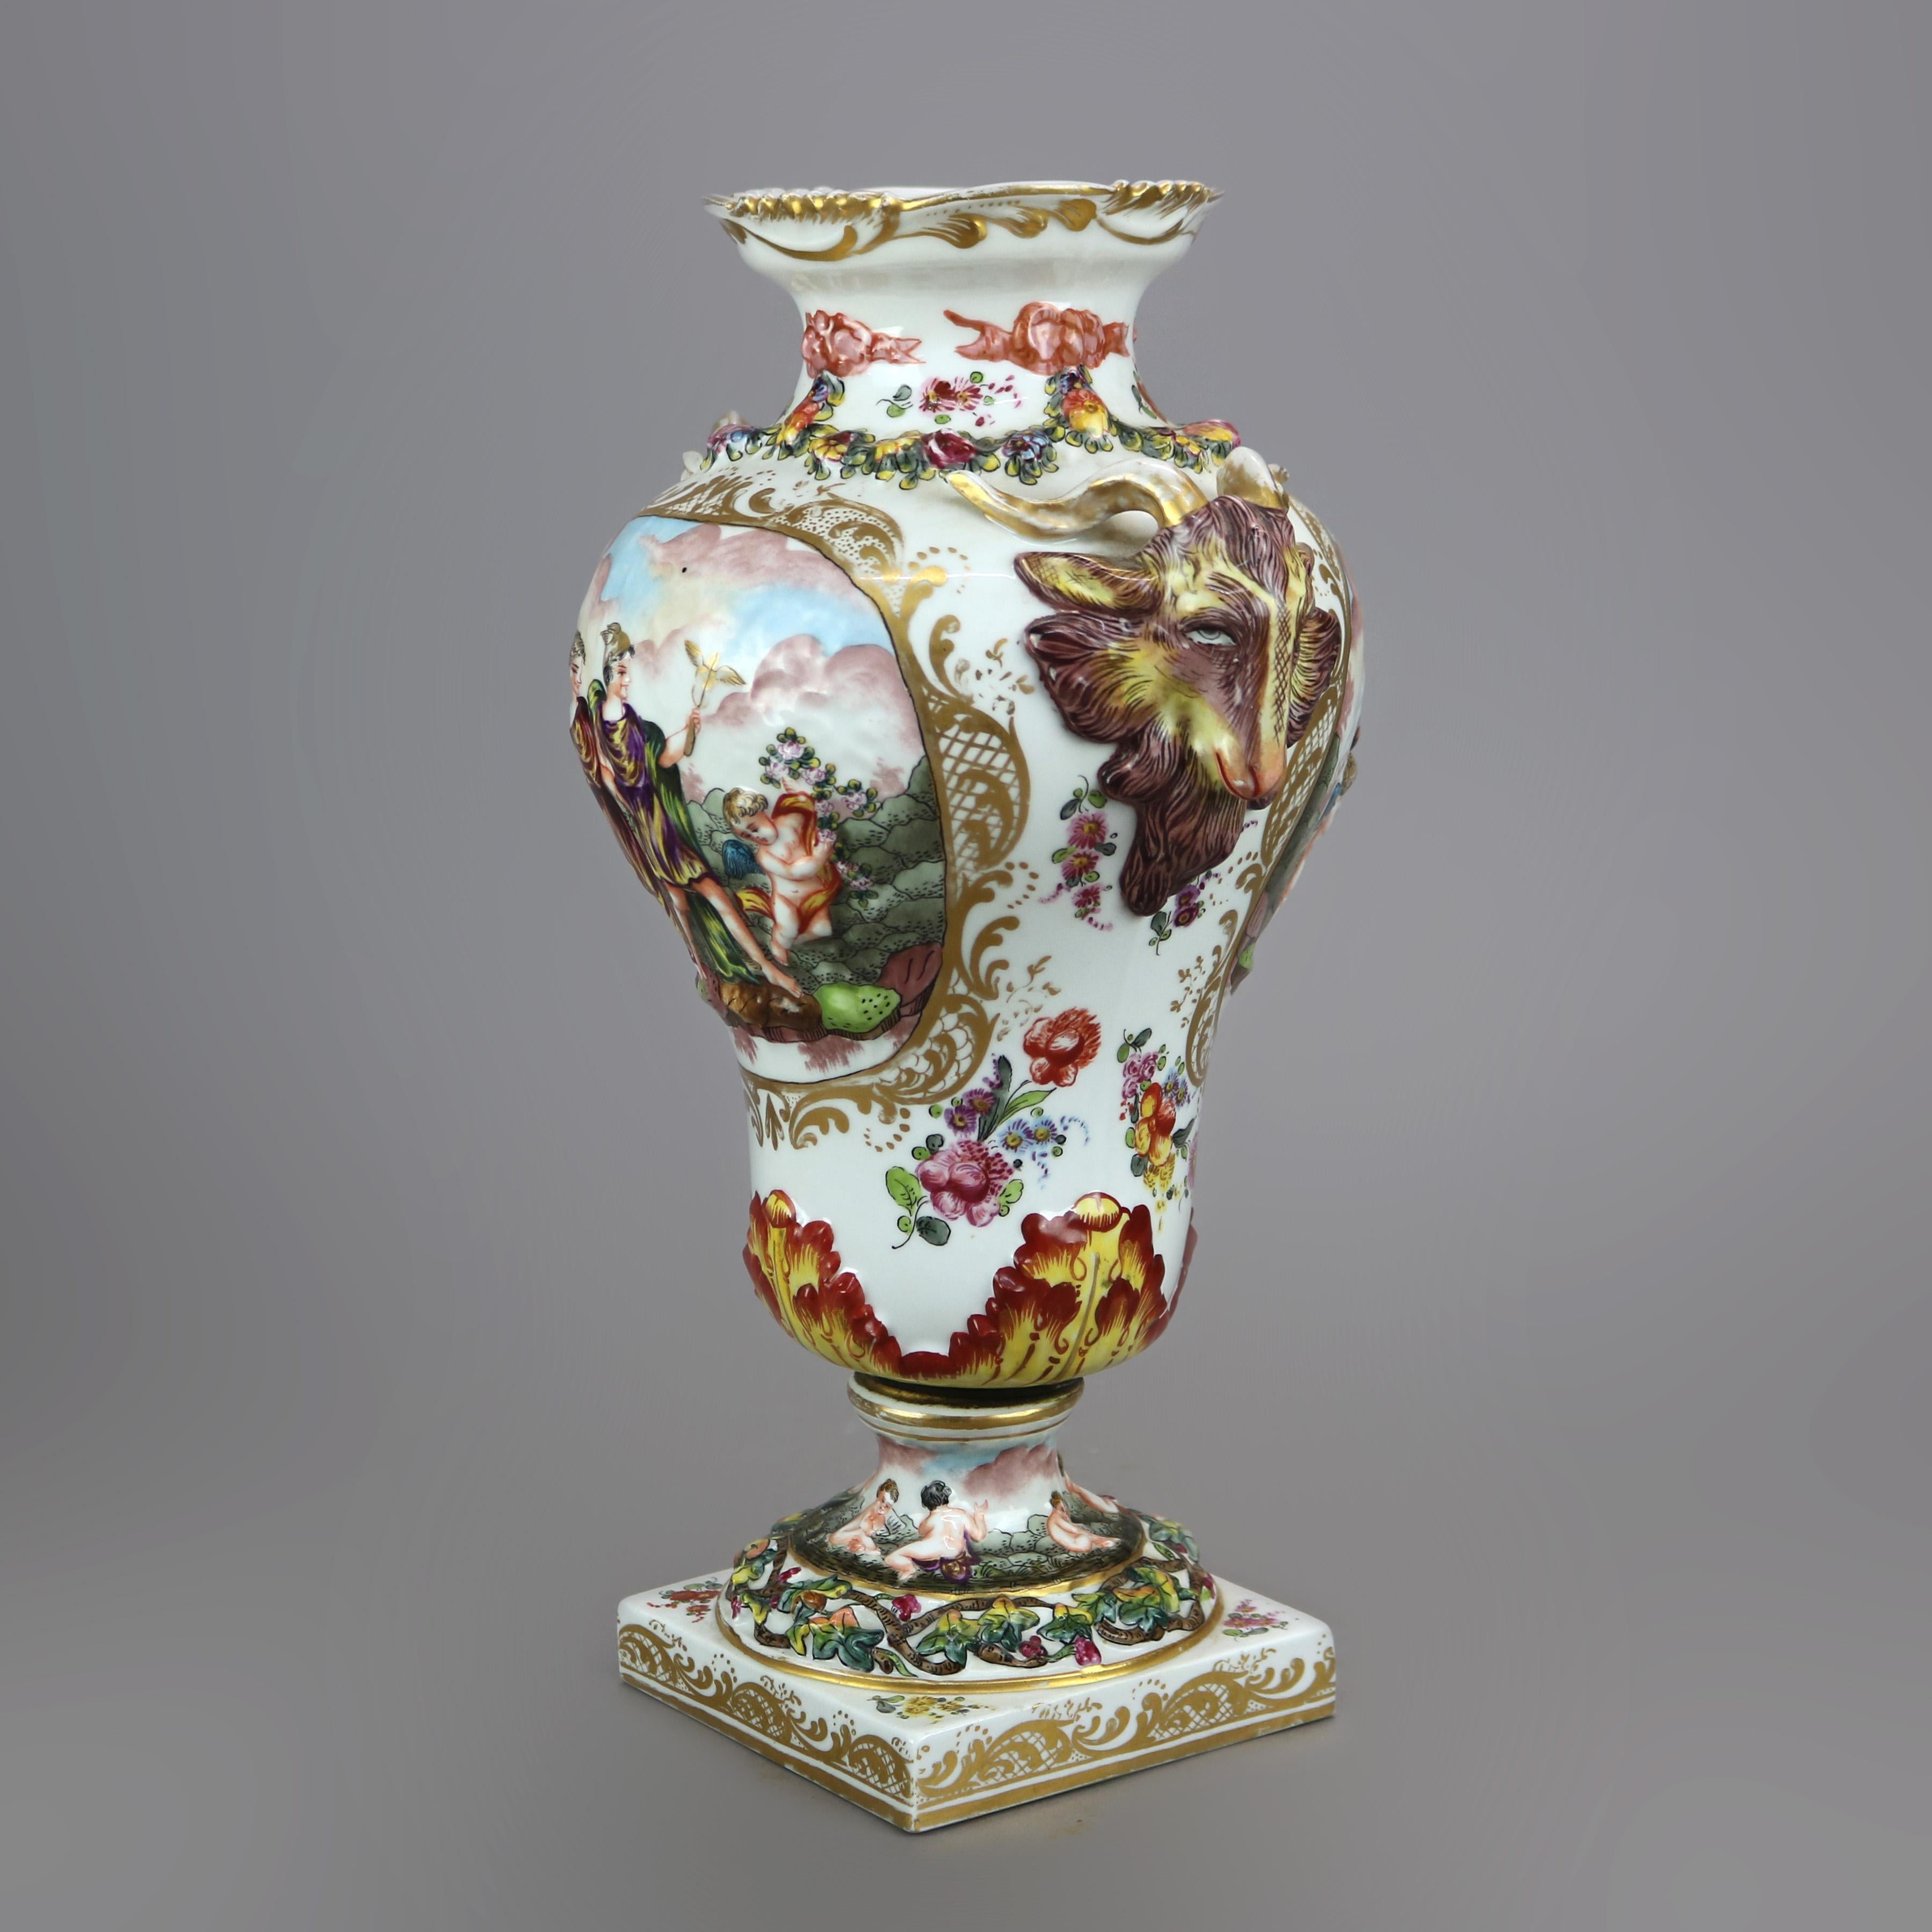 19th Century Antique Pair German Saxony Porcelain Urns with Classical Scenes in Relief, c1860